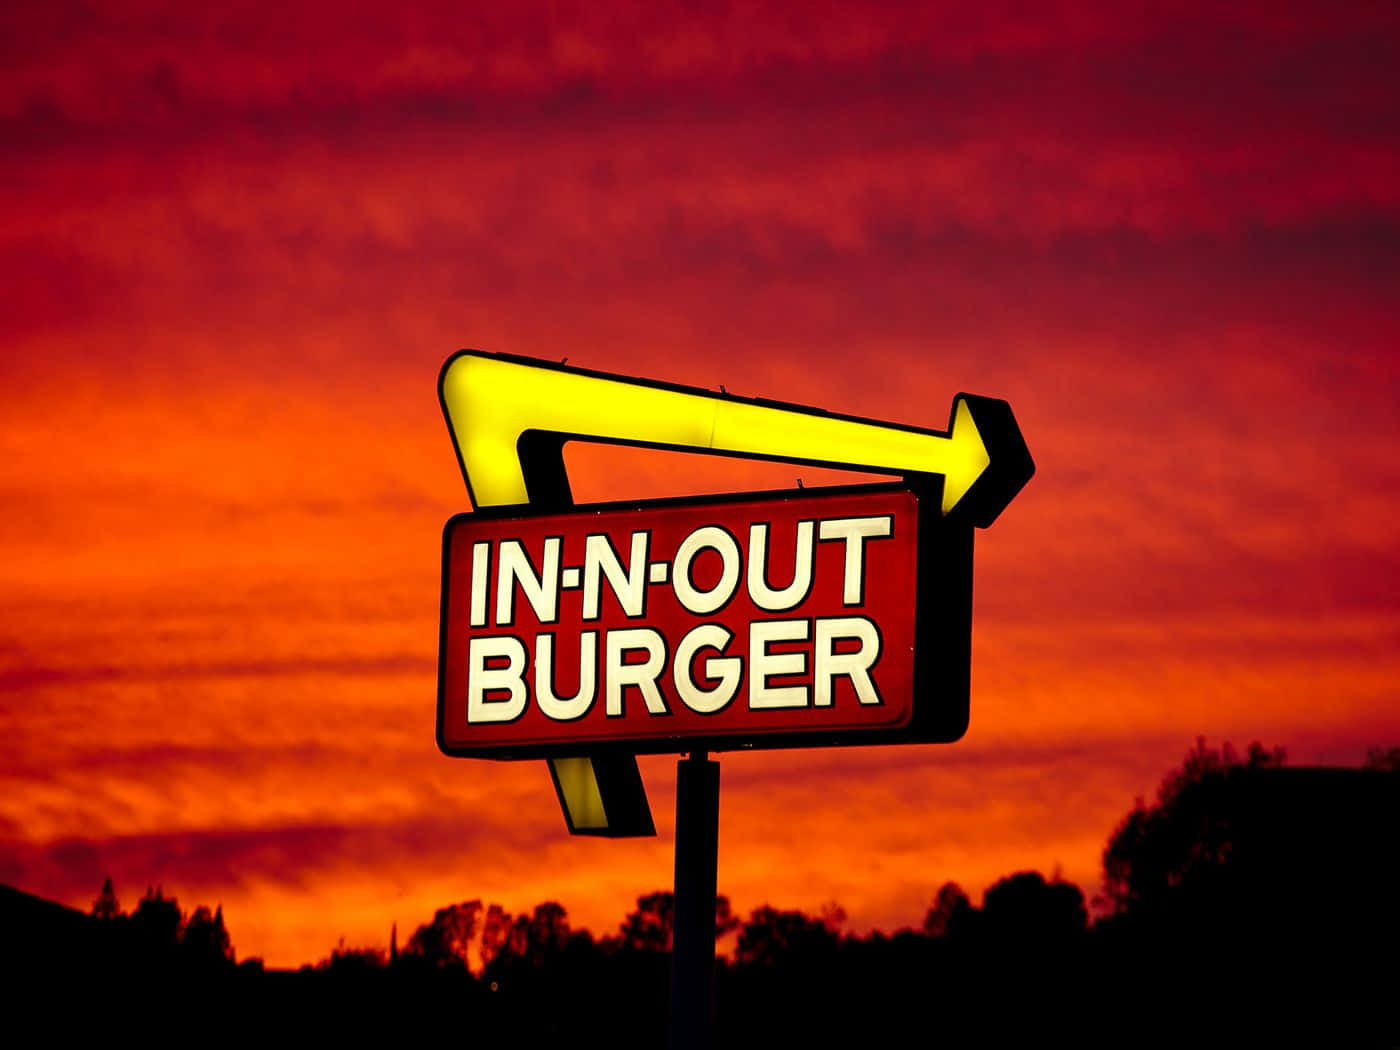 Enjoy delicious burgers and fries at In-N-Out! Wallpaper